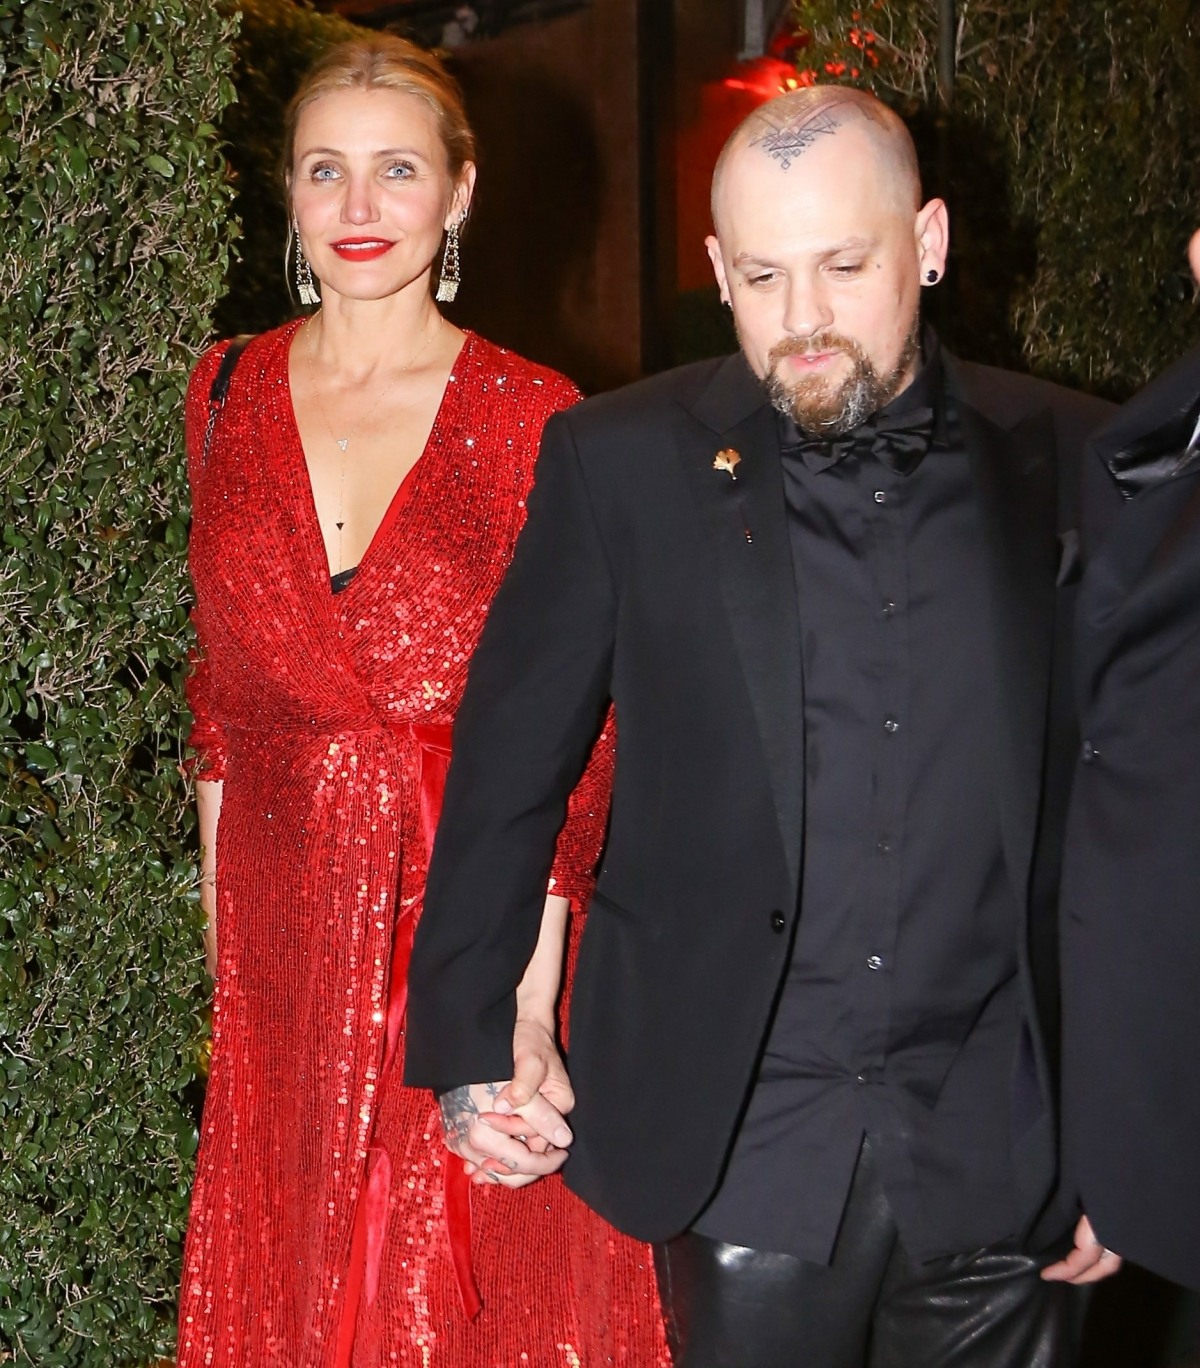 Cameron Diaz and Benji Madden leaving Gwyneth Paltrow and Brad Falchuk's engagement party